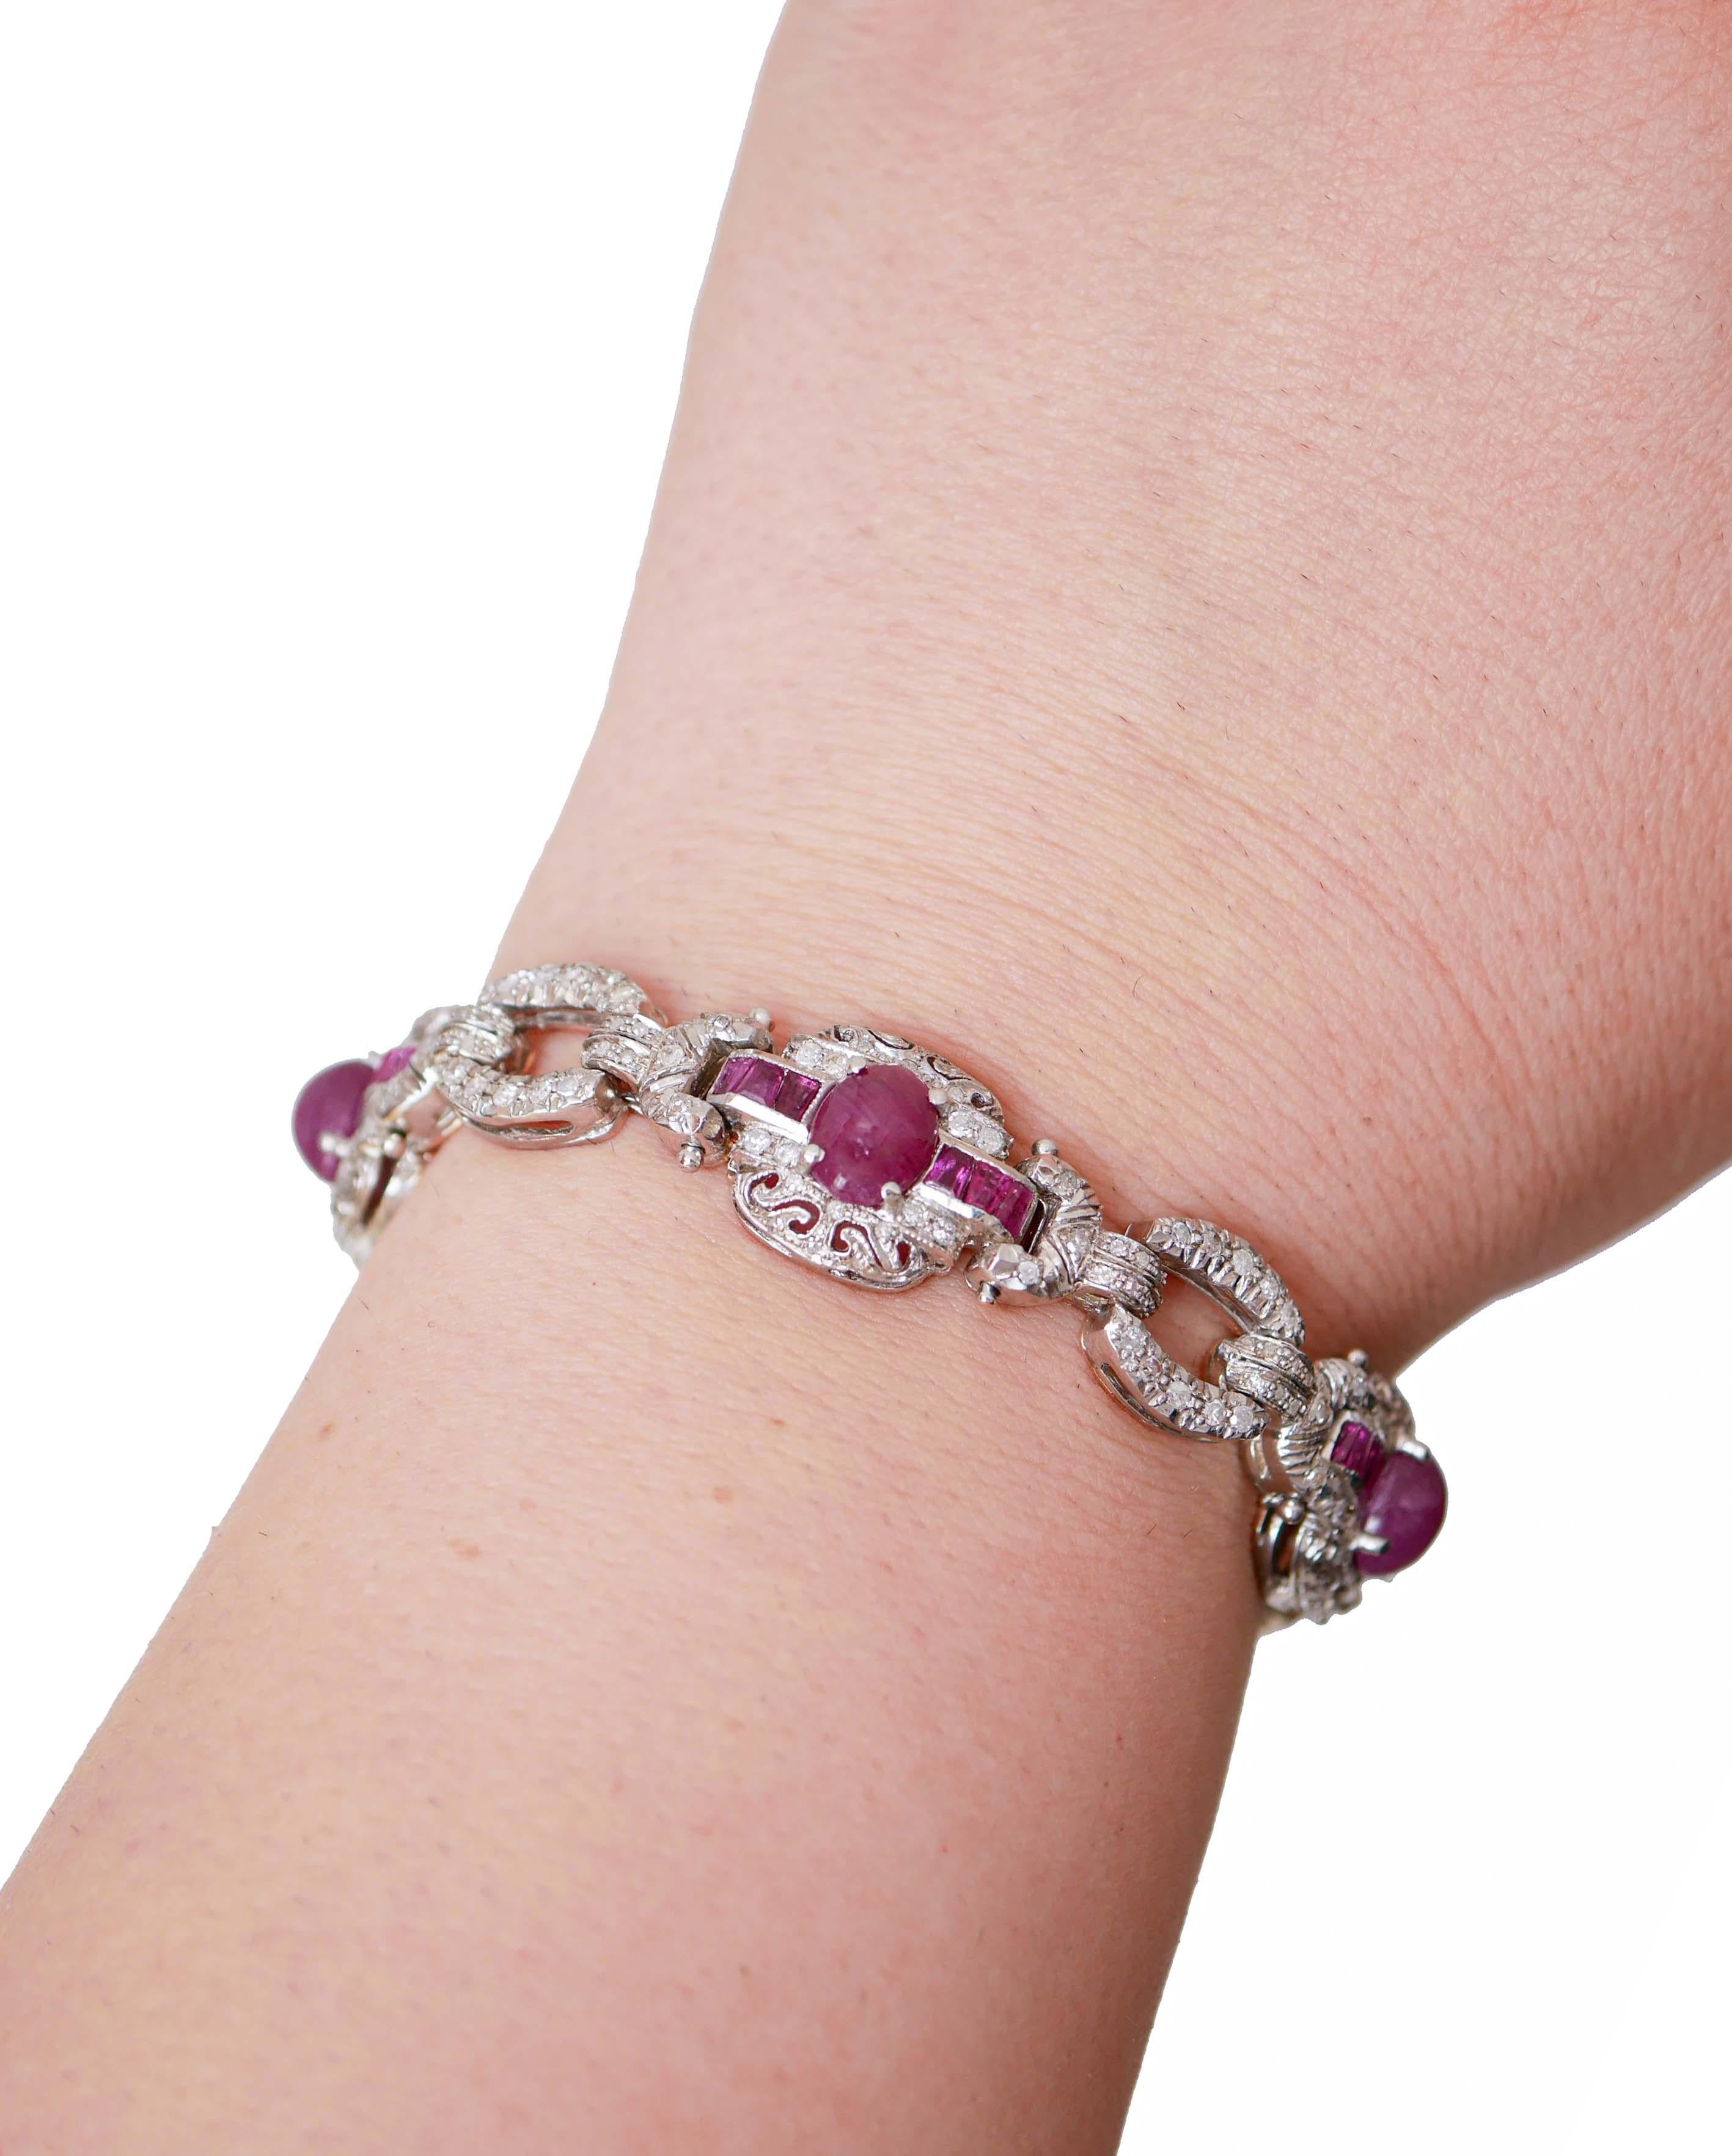 Rubies, Diamonds, 14 Karat Rose Gold and Silver Bracelet. In Good Condition For Sale In Marcianise, Marcianise (CE)